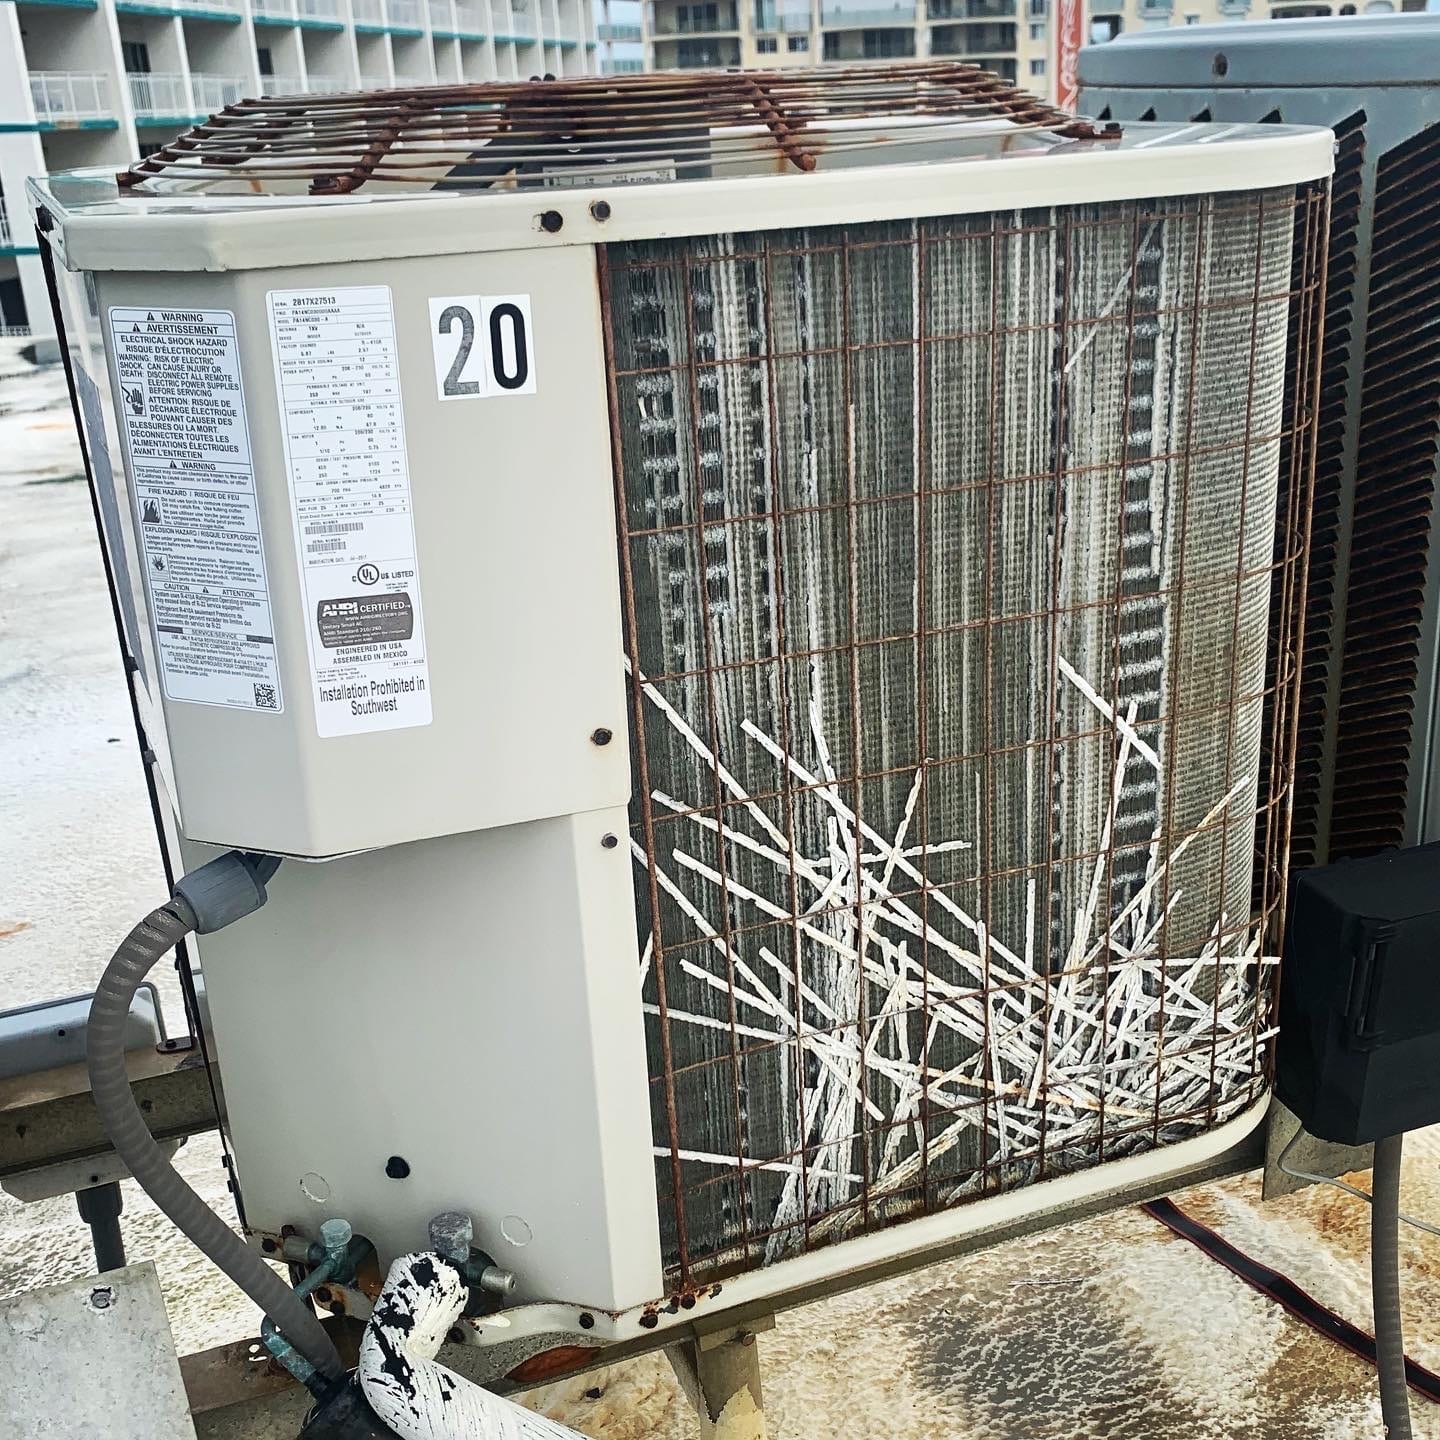 air conditioning unit with damaged fins from salt air corrosion